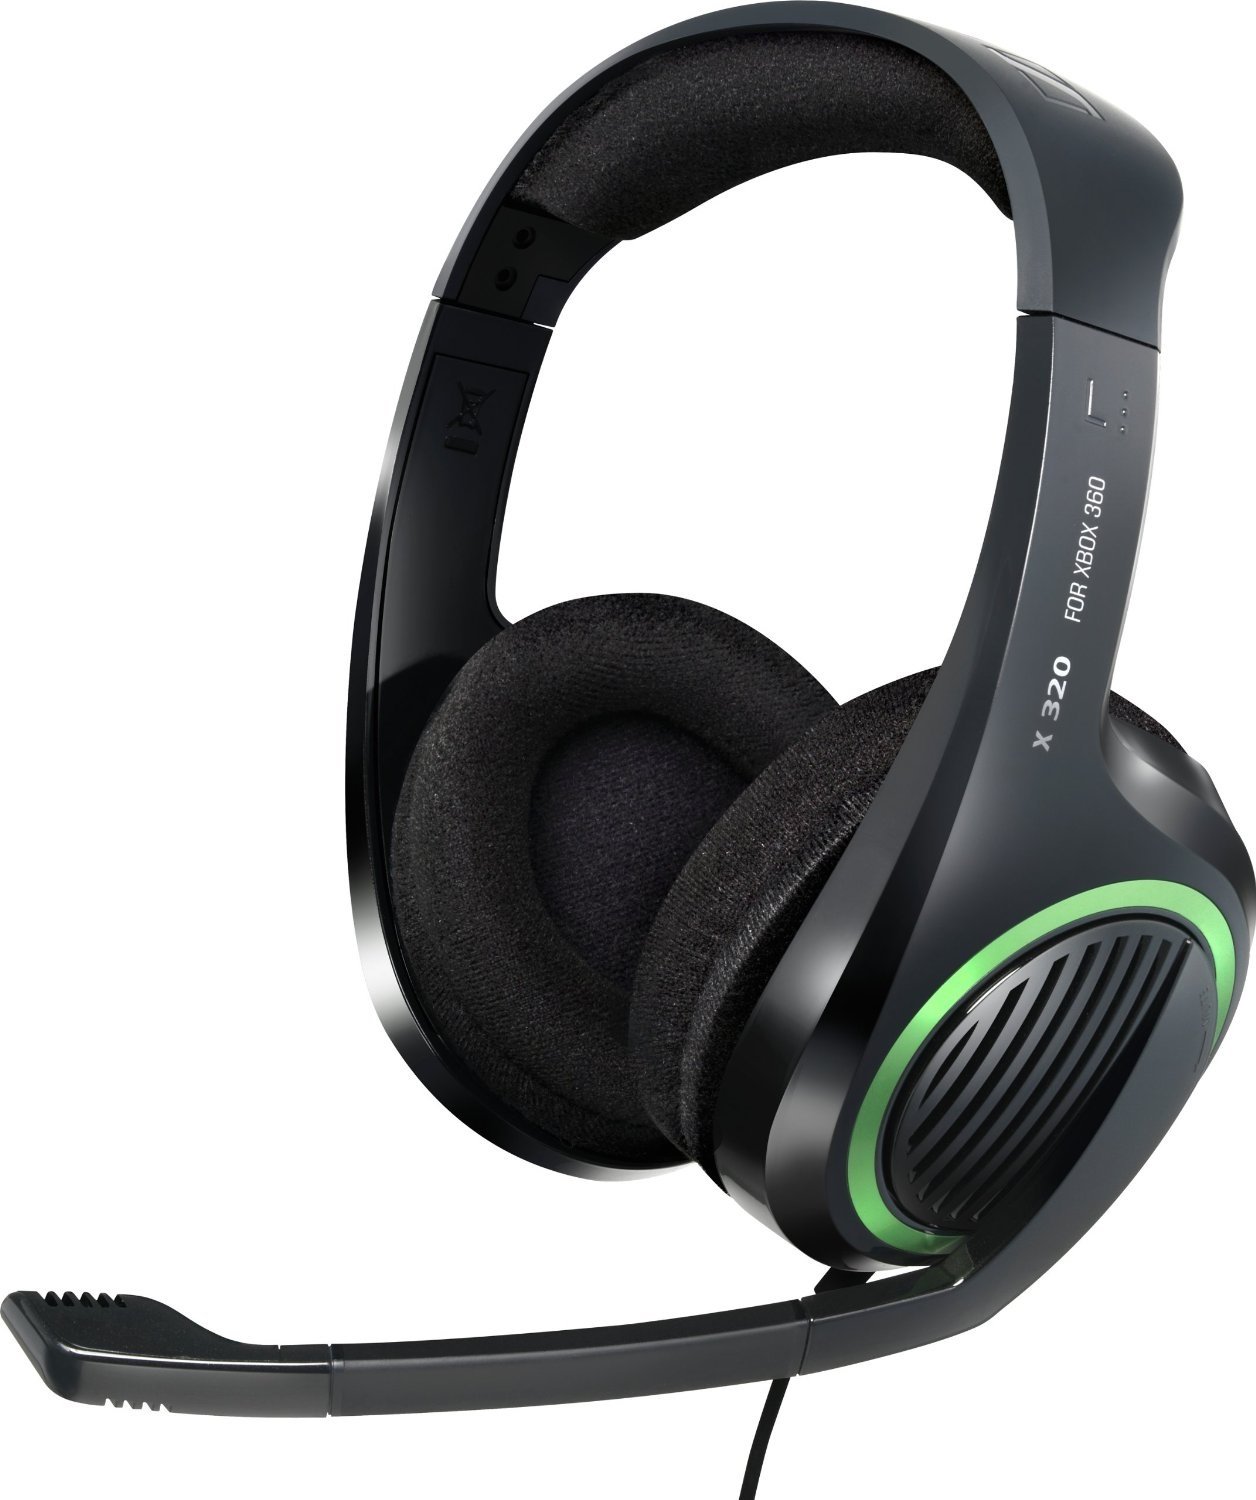 Check for any loose connections or damaged cables.
If using a wireless headset, make sure it is properly synced with the Xbox console.